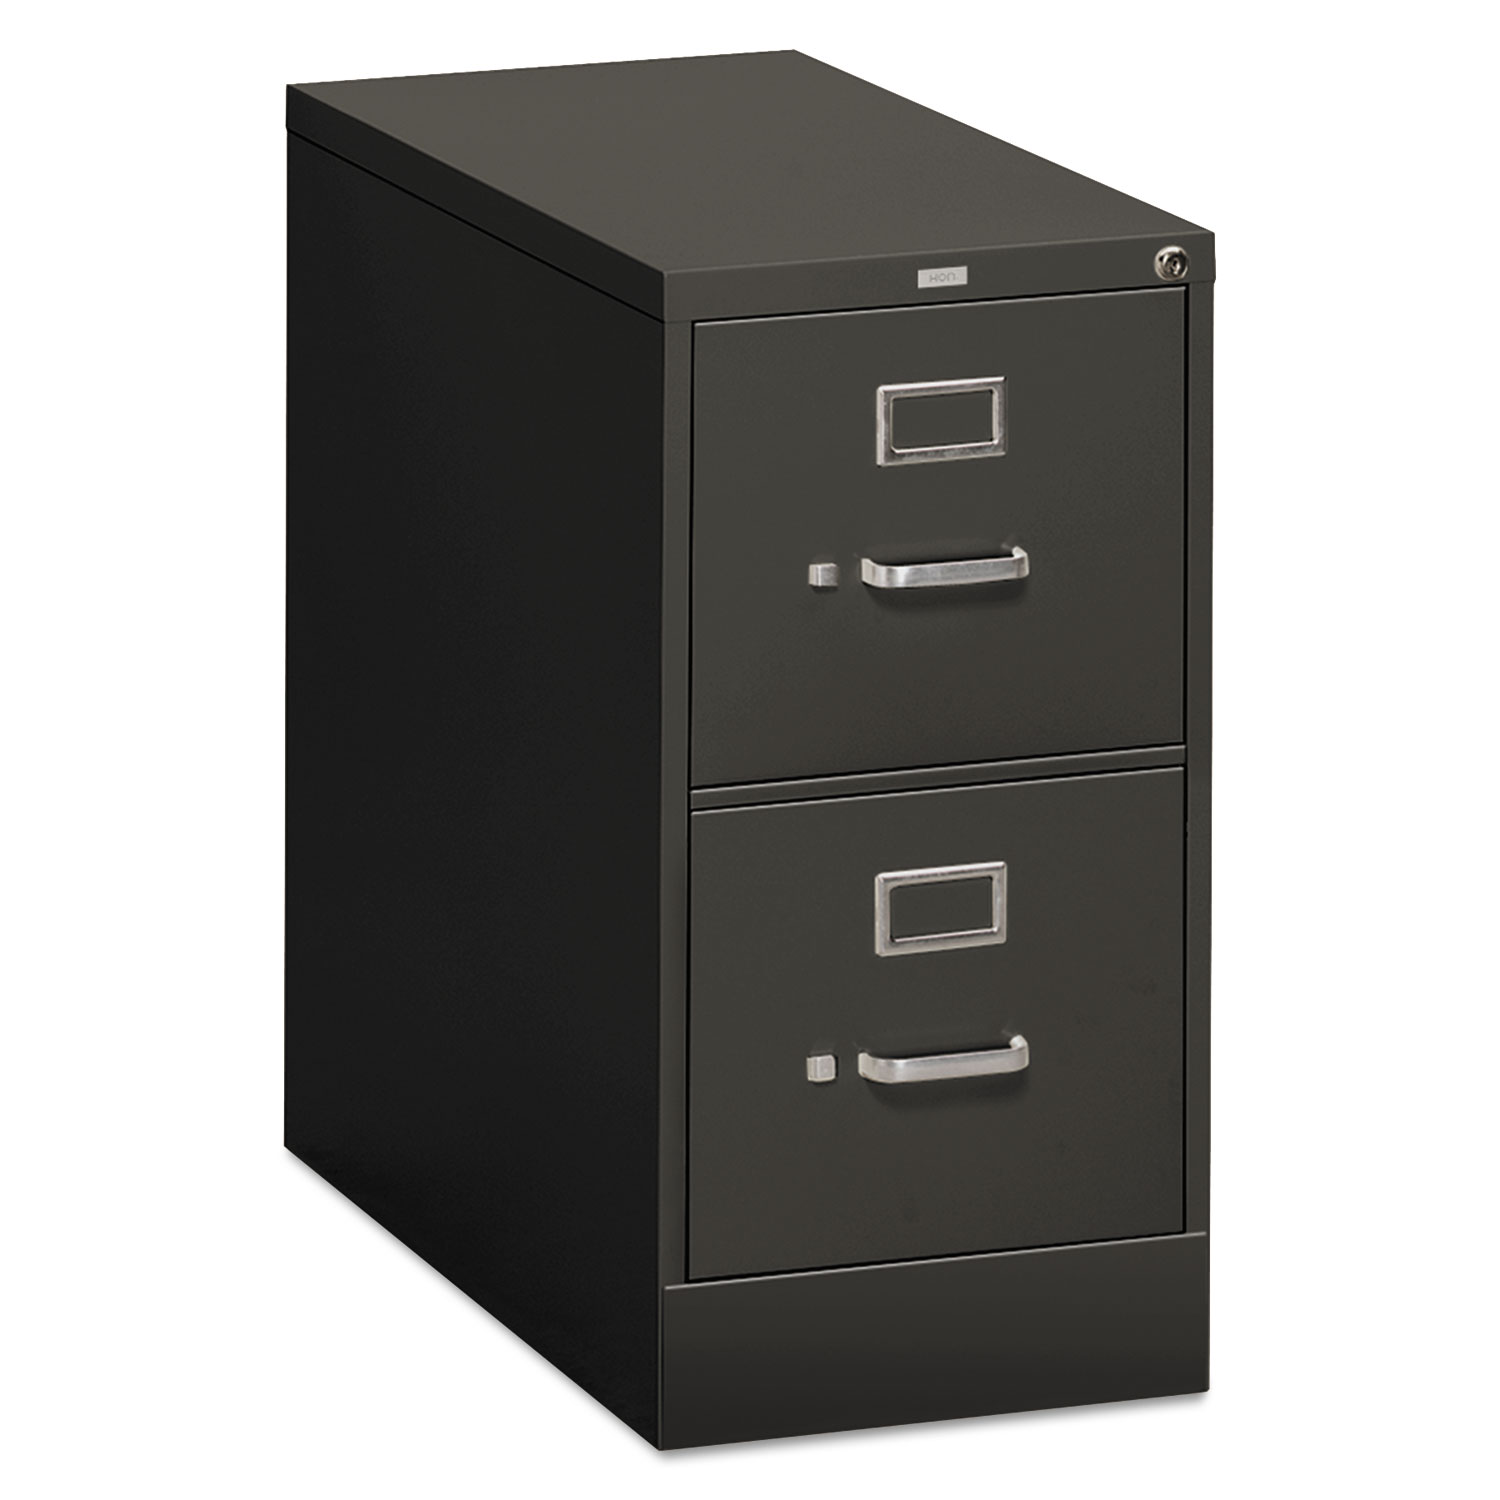  HON H312.P.S 310 Series Two-Drawer Full-Suspension File, Letter, 15w x 26.5d x 29h, Charcoal (HON312PS) 